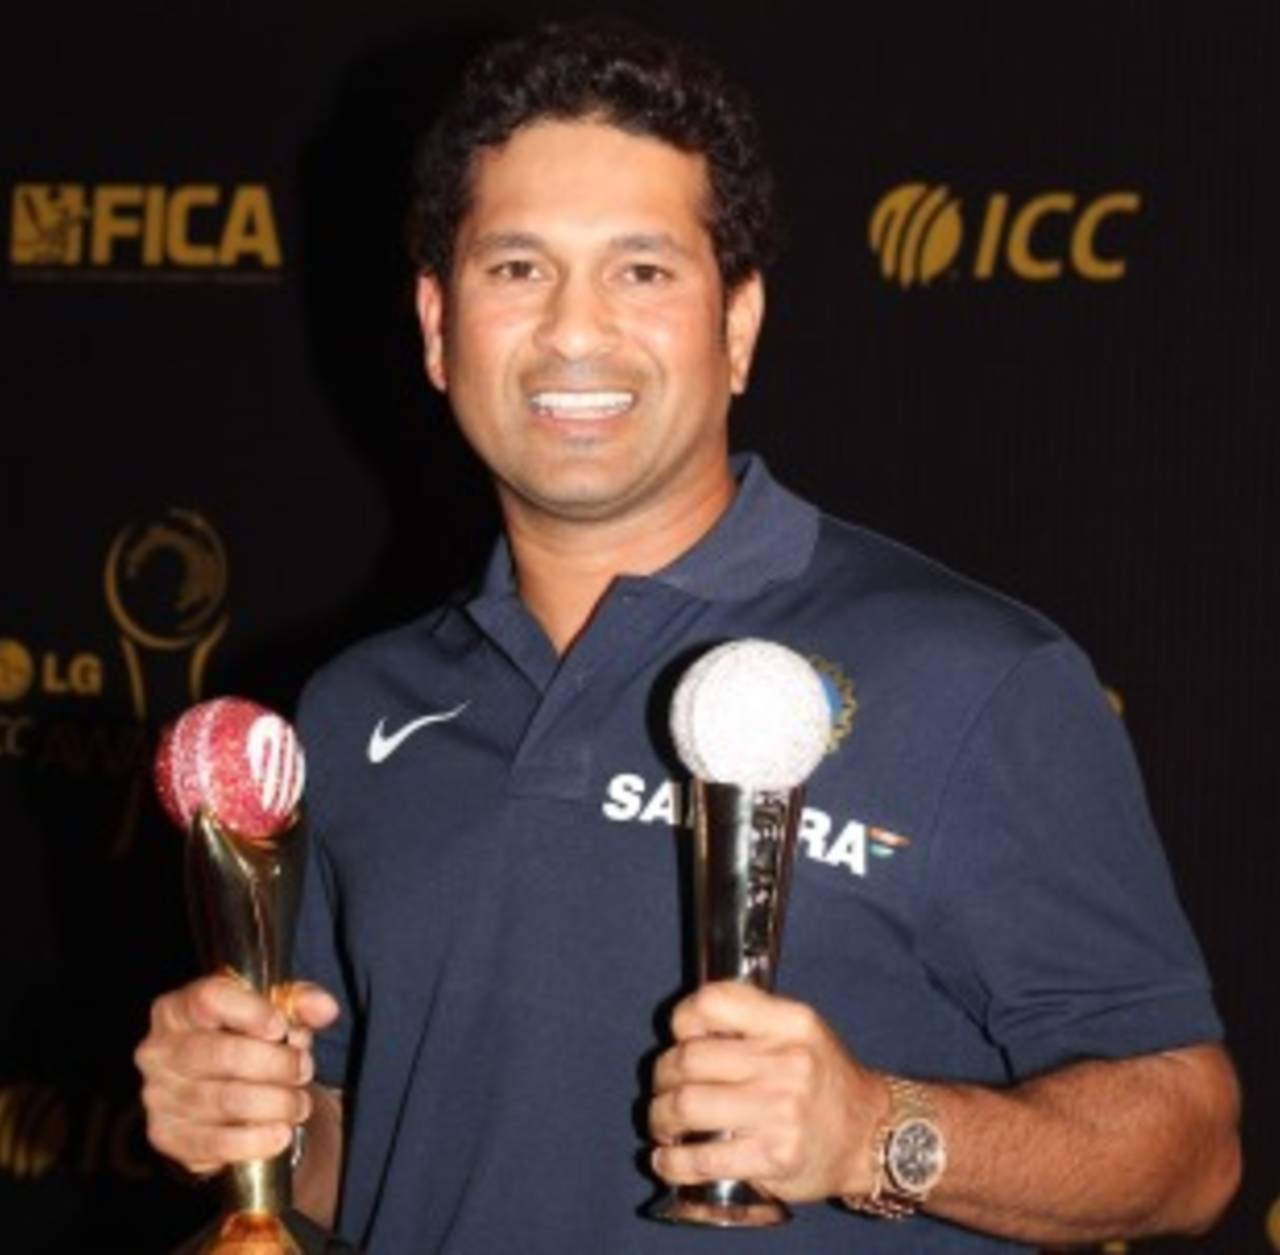 Sachin Tendulkar with his ICC awards - Cricketer of the Year and the People's Choice